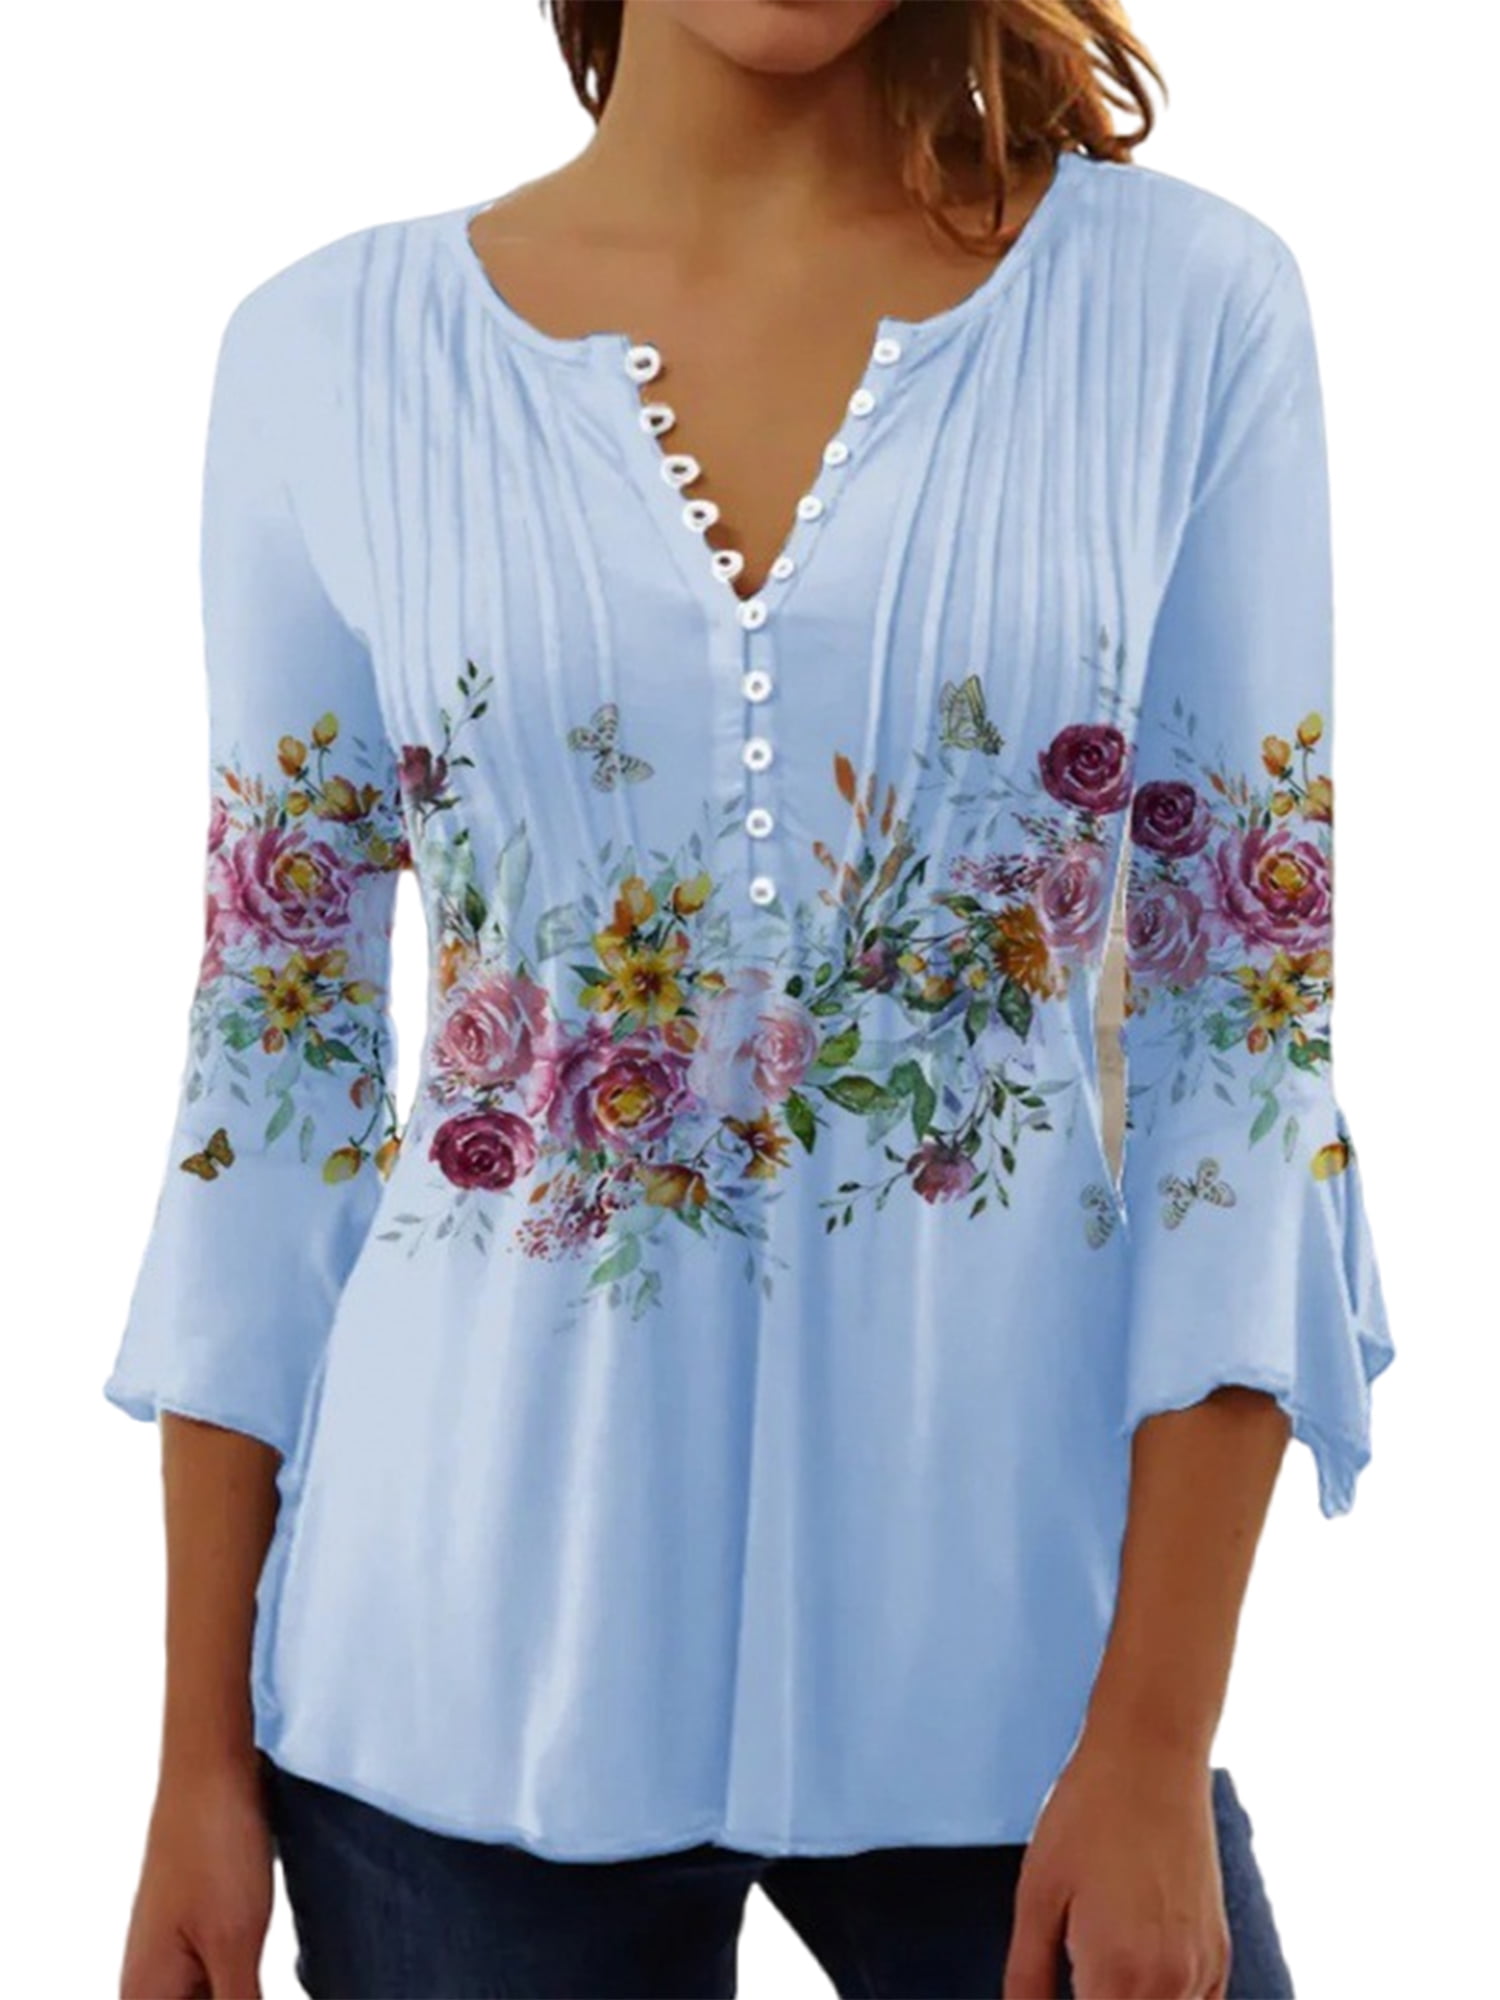 Women Button Up Blouses for Women Floral Print Shirts 3/4 Sleeve V Neck ...